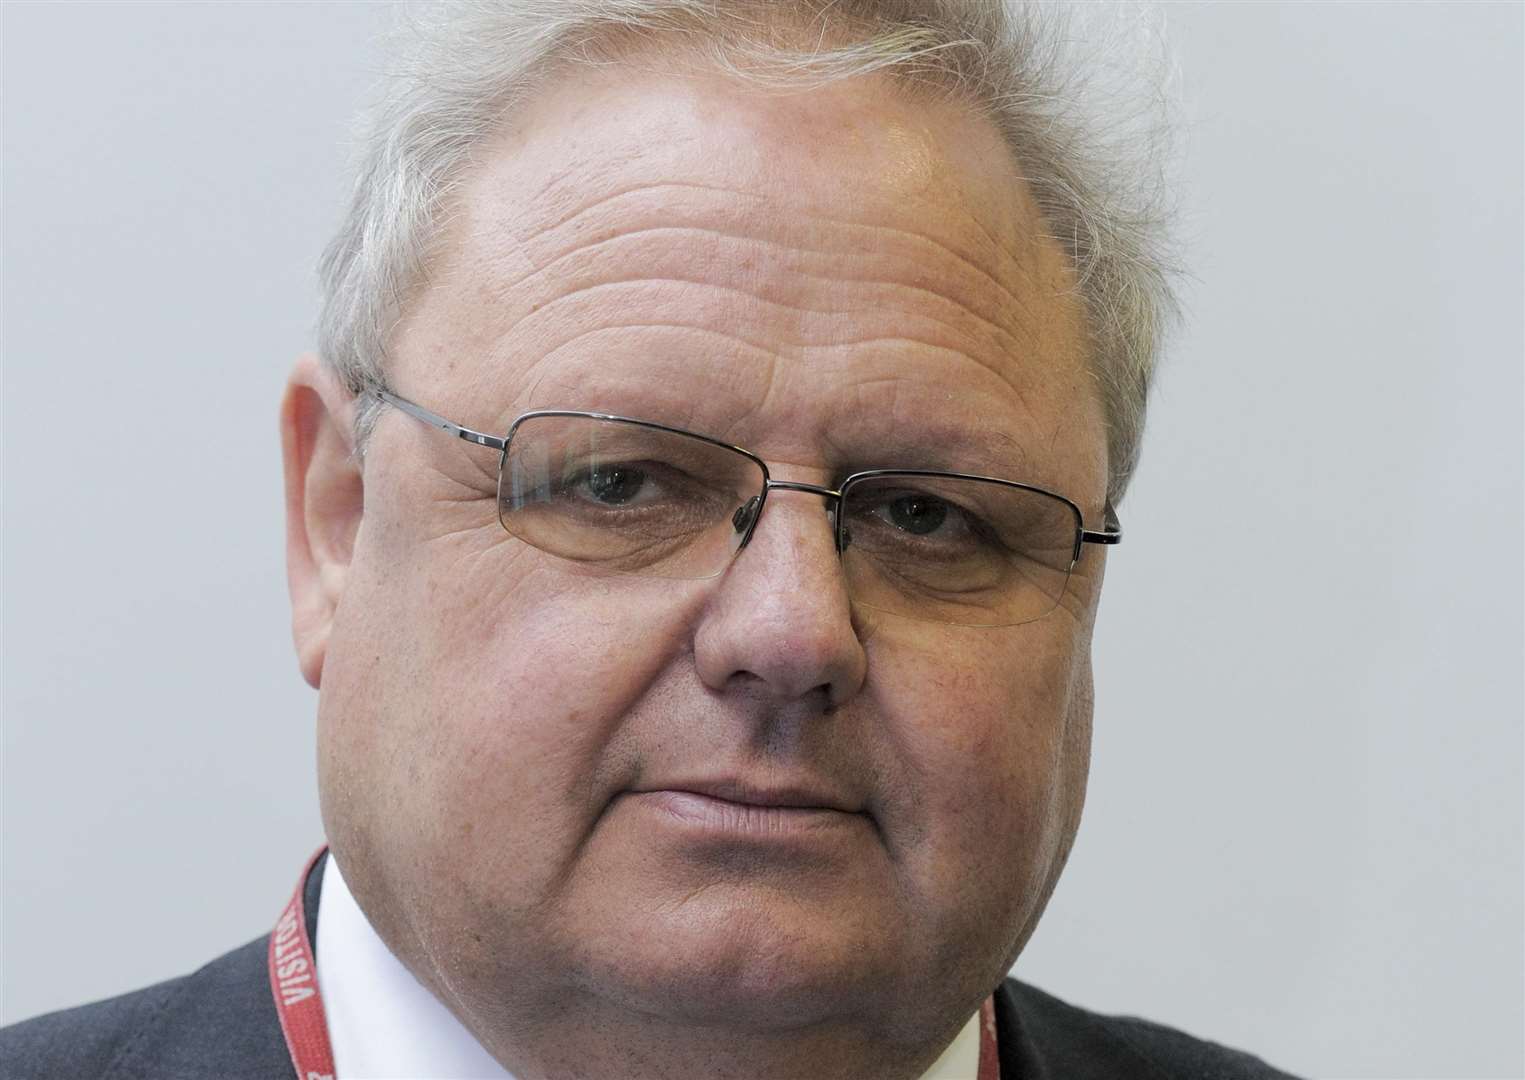 Swale Borough Council leader Cllr Andrew Bowles has been suspended. Picture: Andy Payton